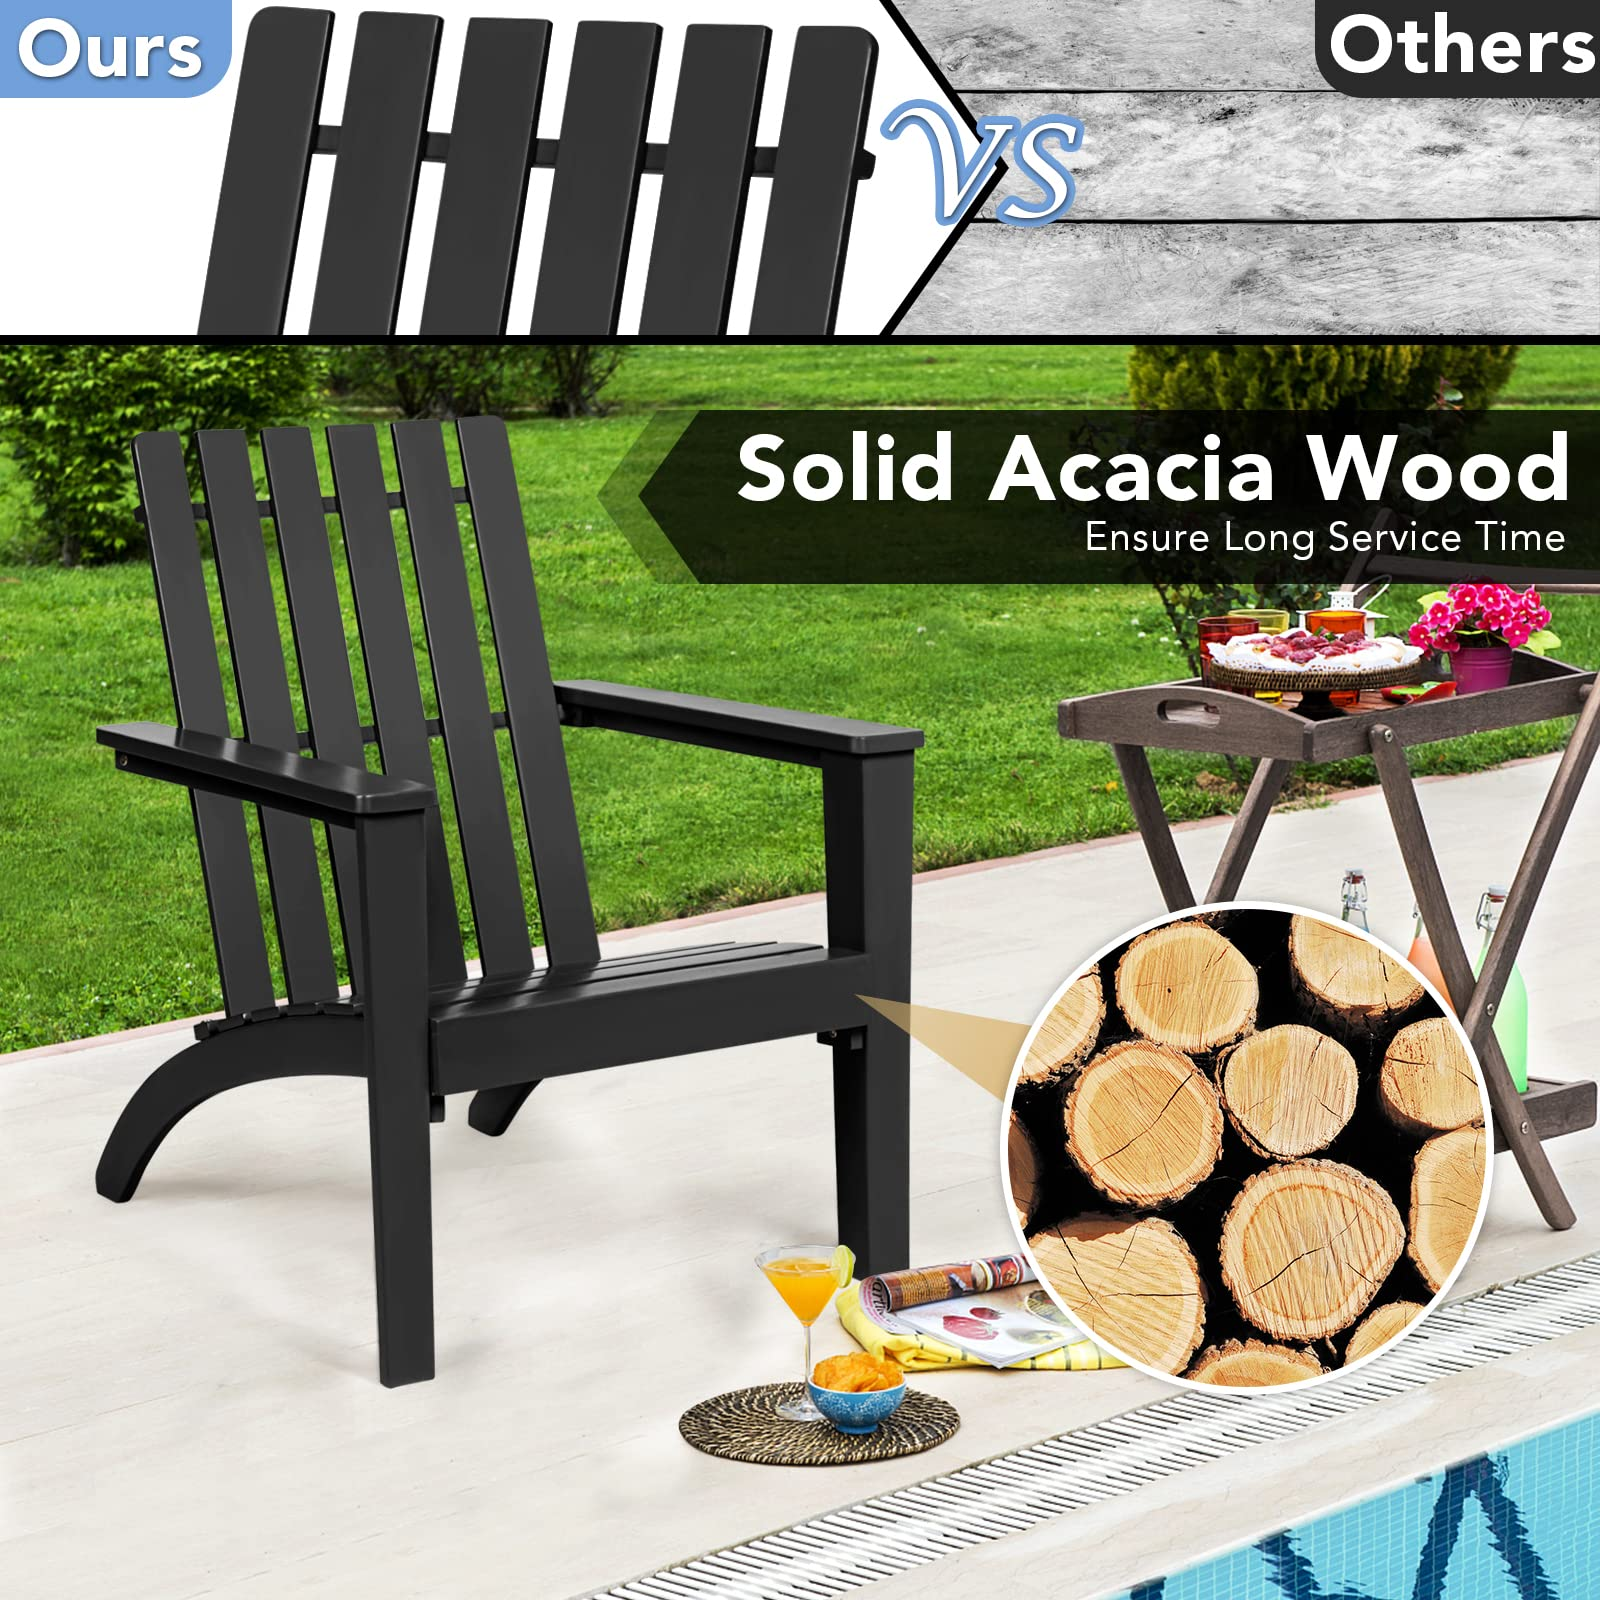 Giantex Wood Adirondack Chair & Side Table Set, Patio Bistro Set with Slatted Design